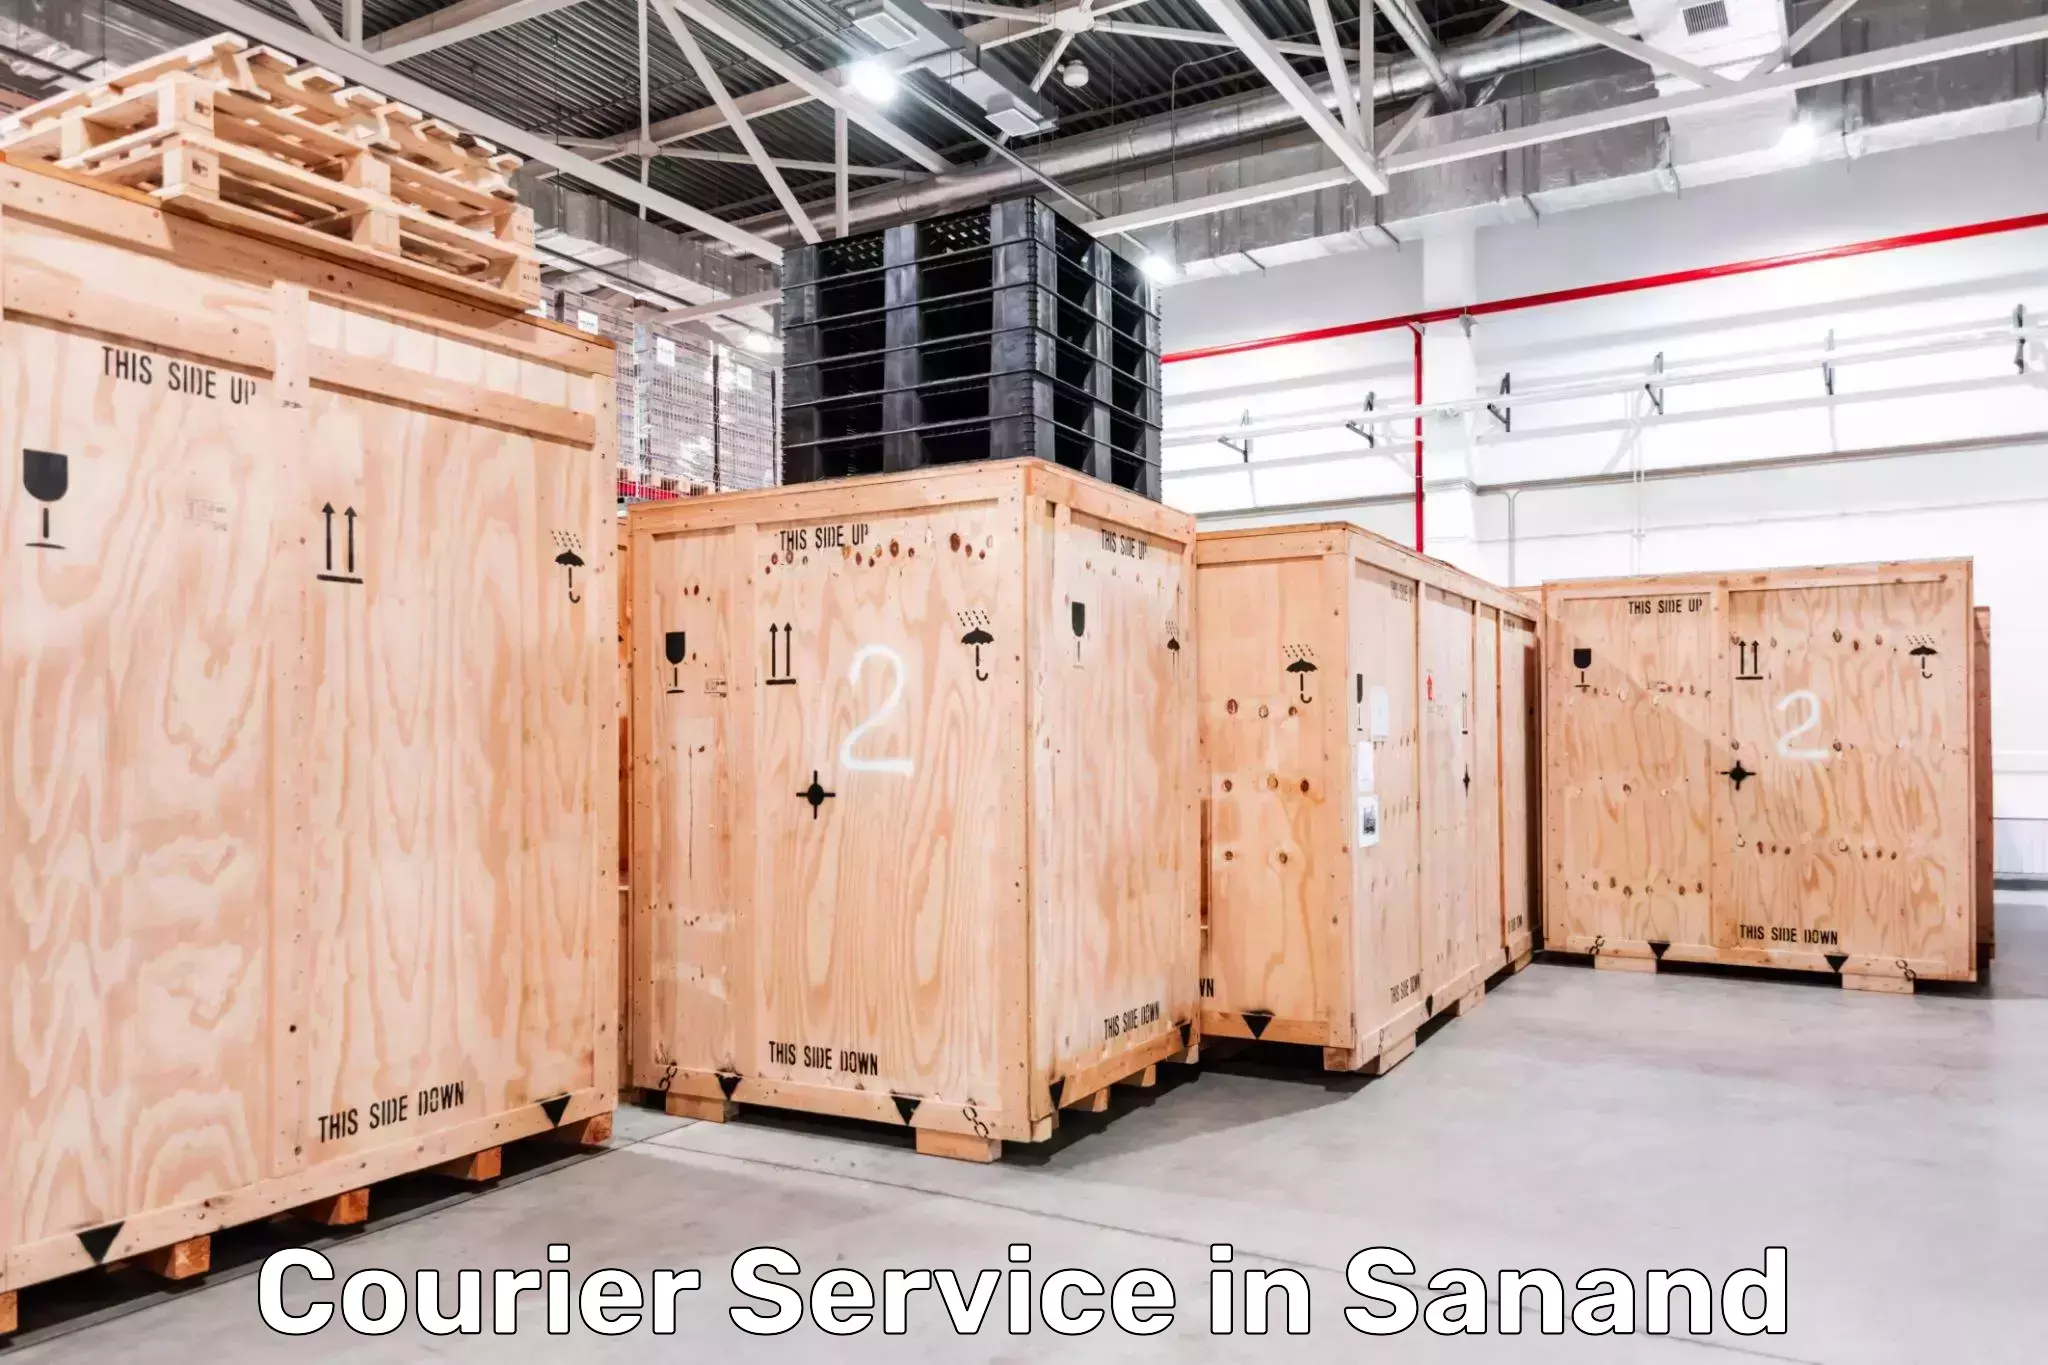 Express courier capabilities in Sanand